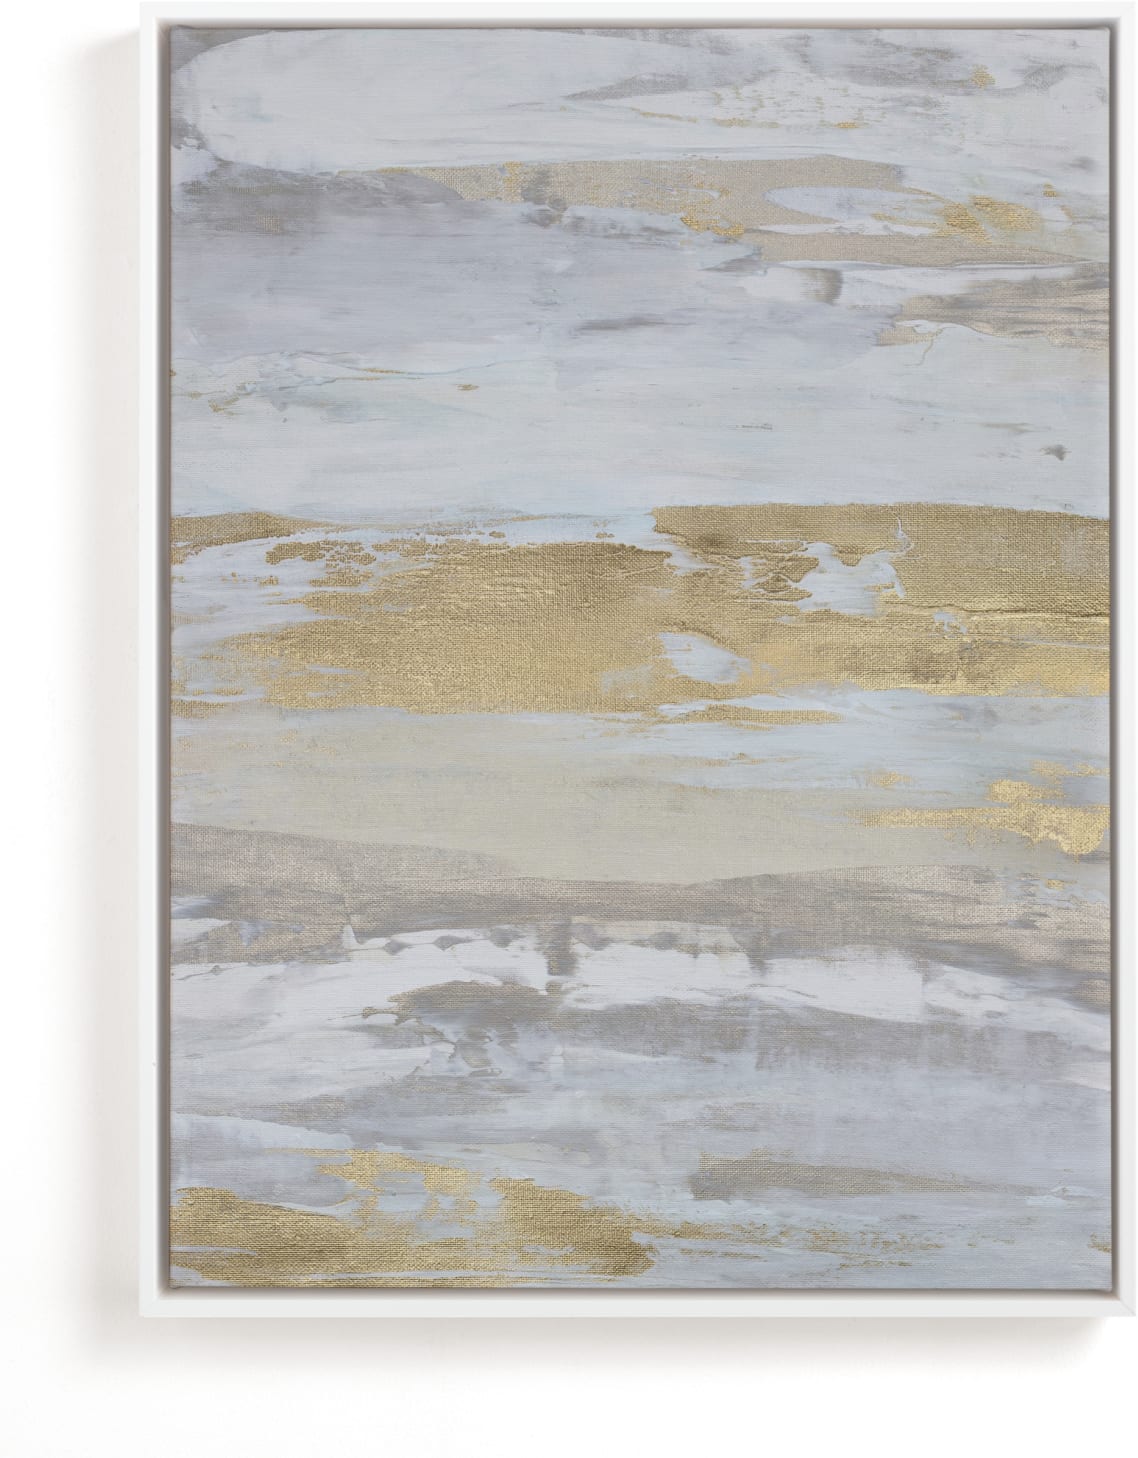 This is a grey art by Julia Contacessi called Malibu Gold No. 1.